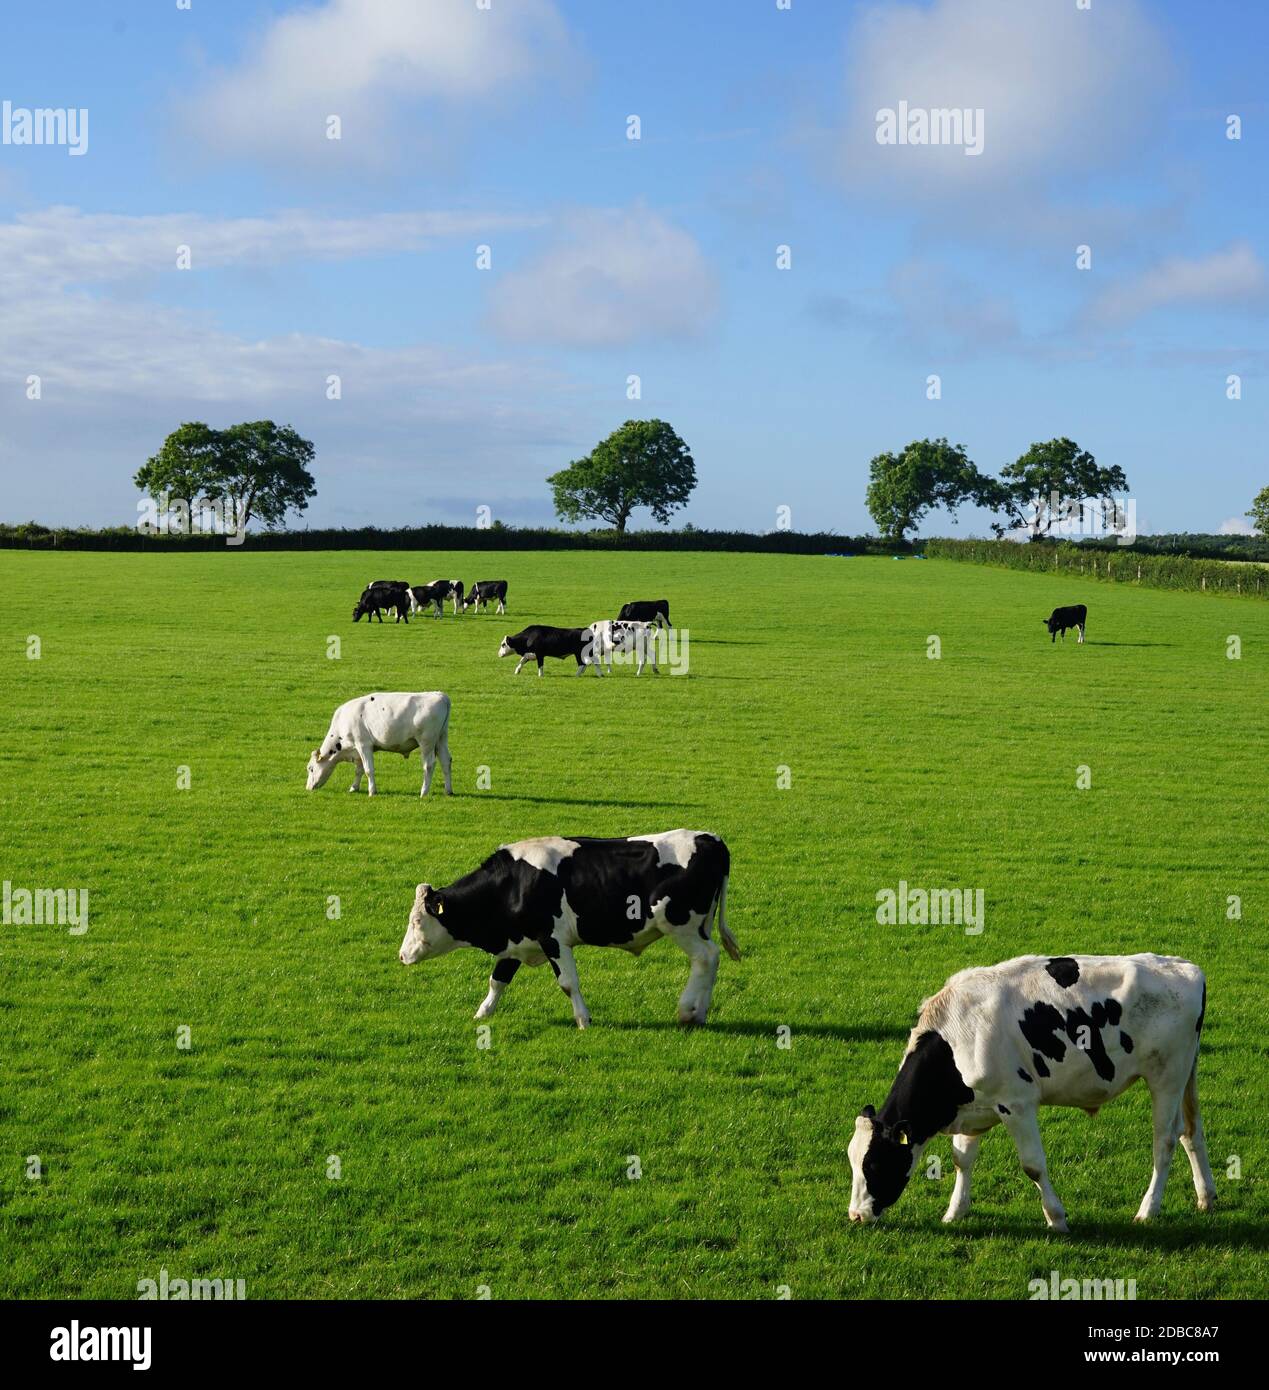 Black and white cows on a farm land Stock Photo